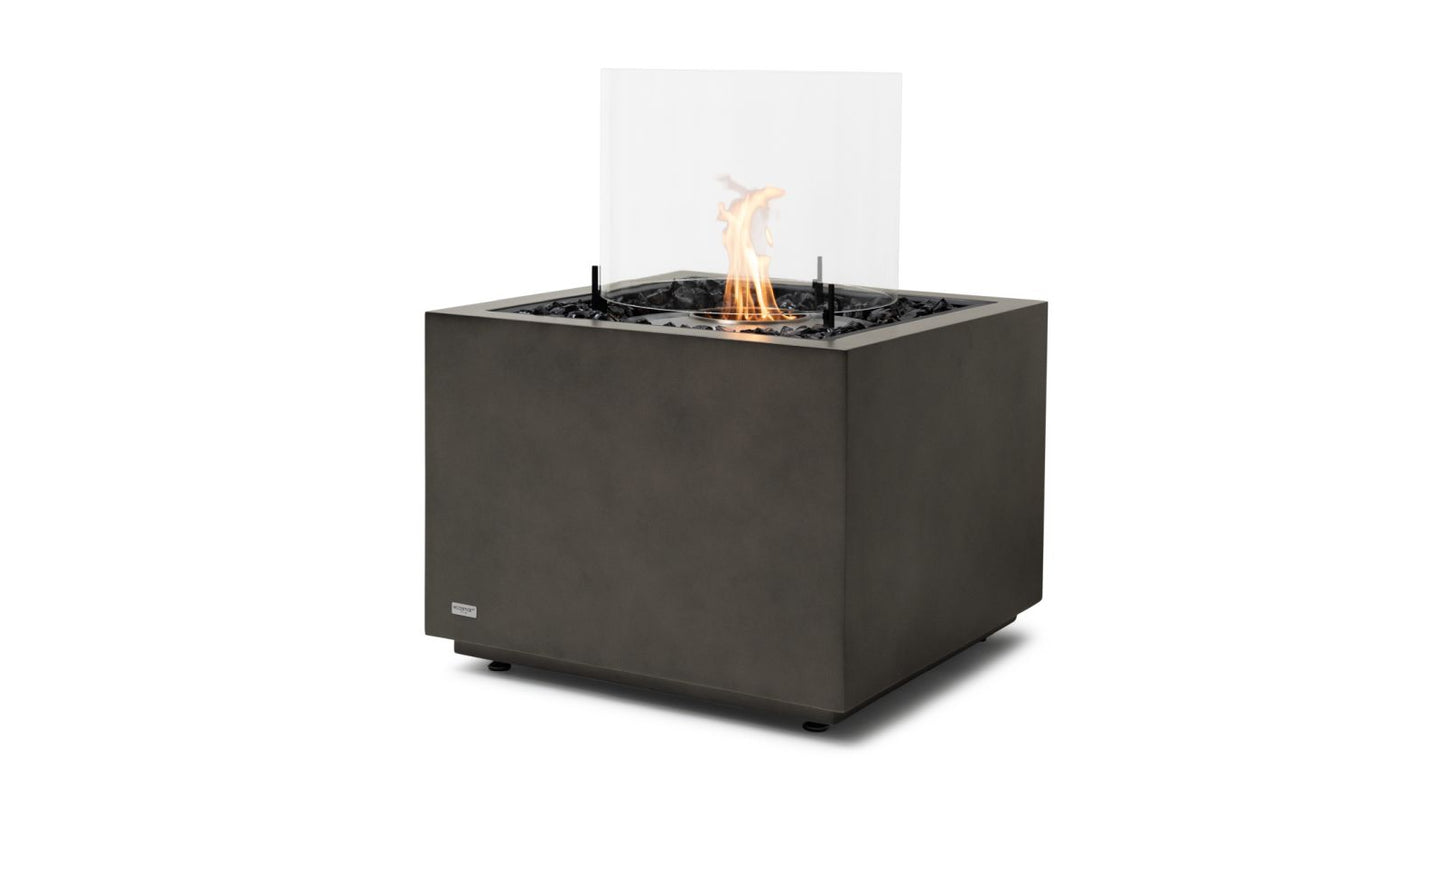 EcoSmart Fire - Sidecar 24 - Fire Pit Table - Natural